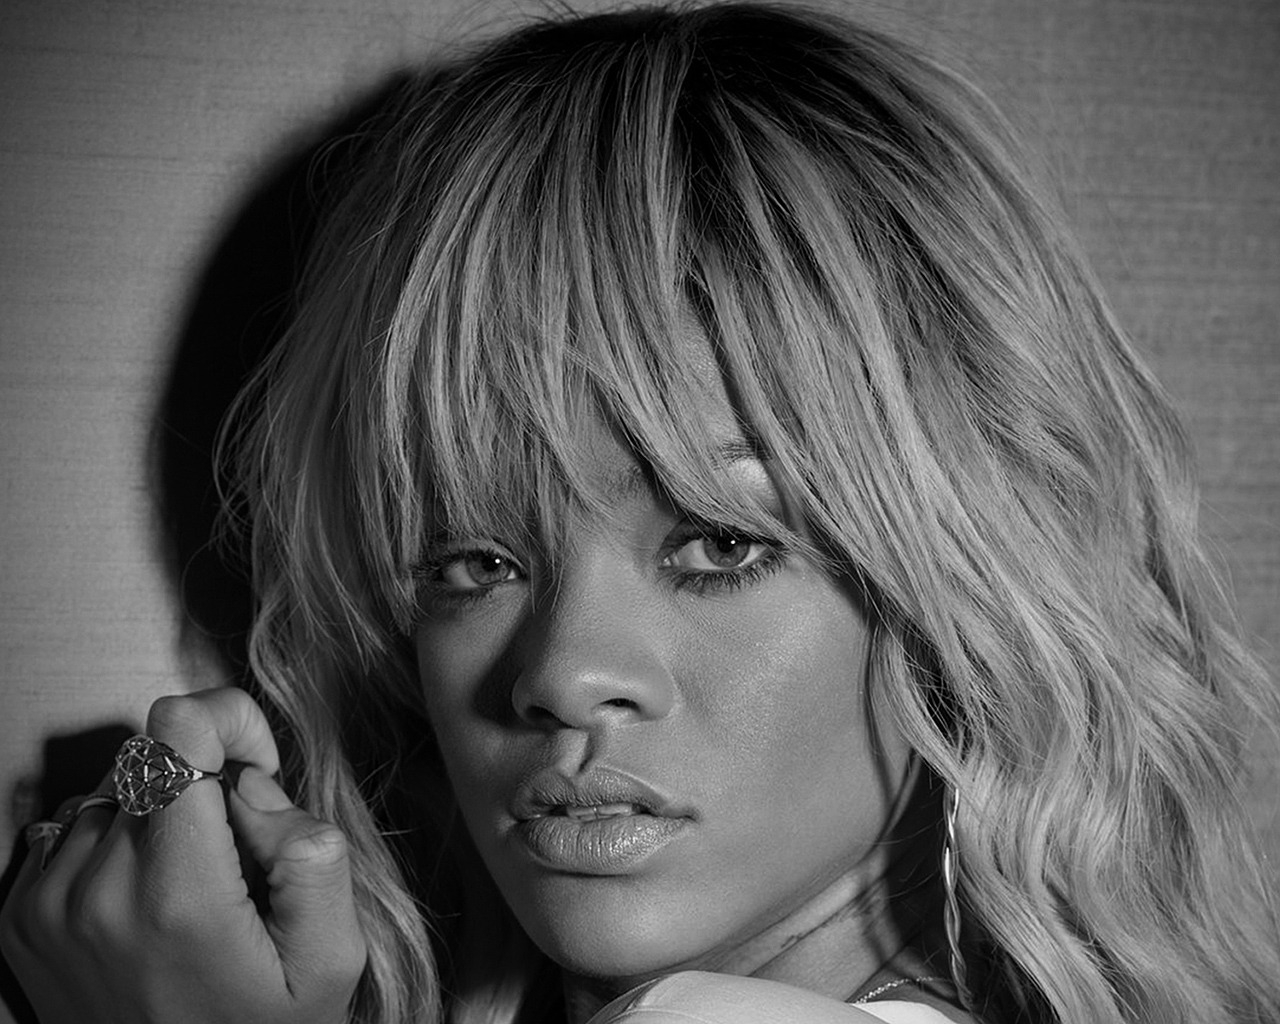 Rihanna Black and White for 1280 x 1024 resolution